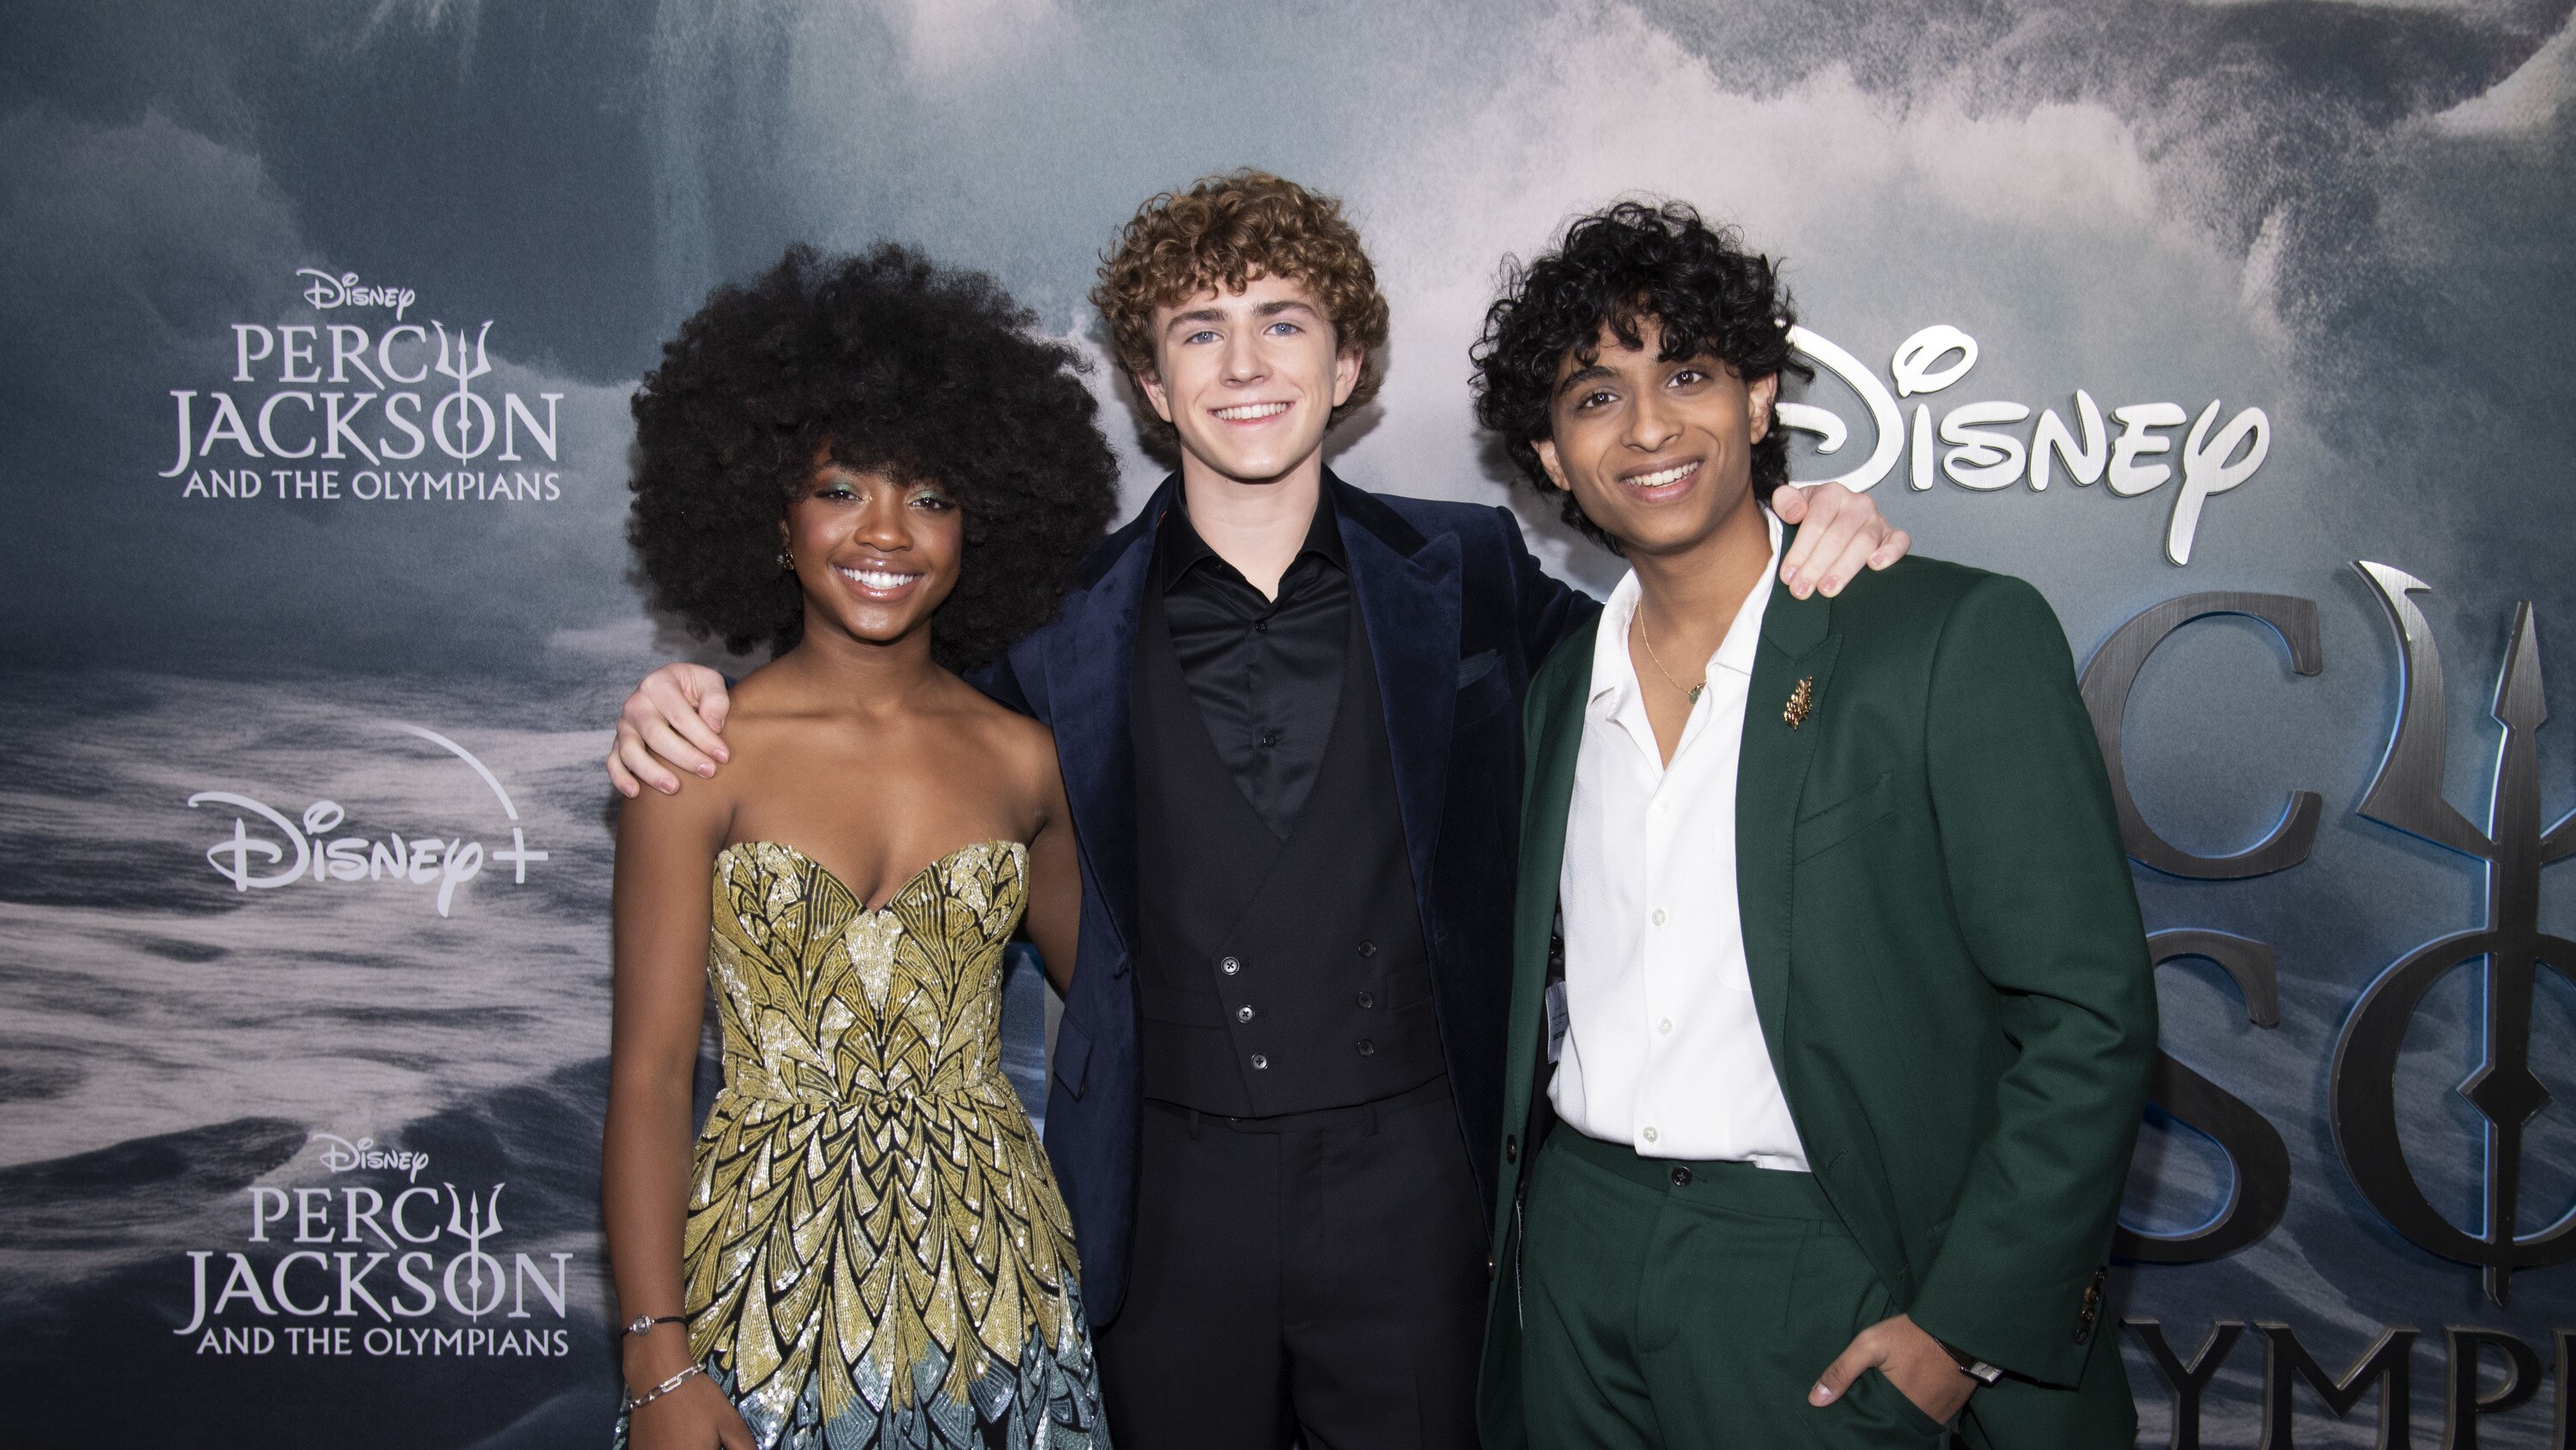 Photos And Video Available From World Premiere Of Disney+ Original ...